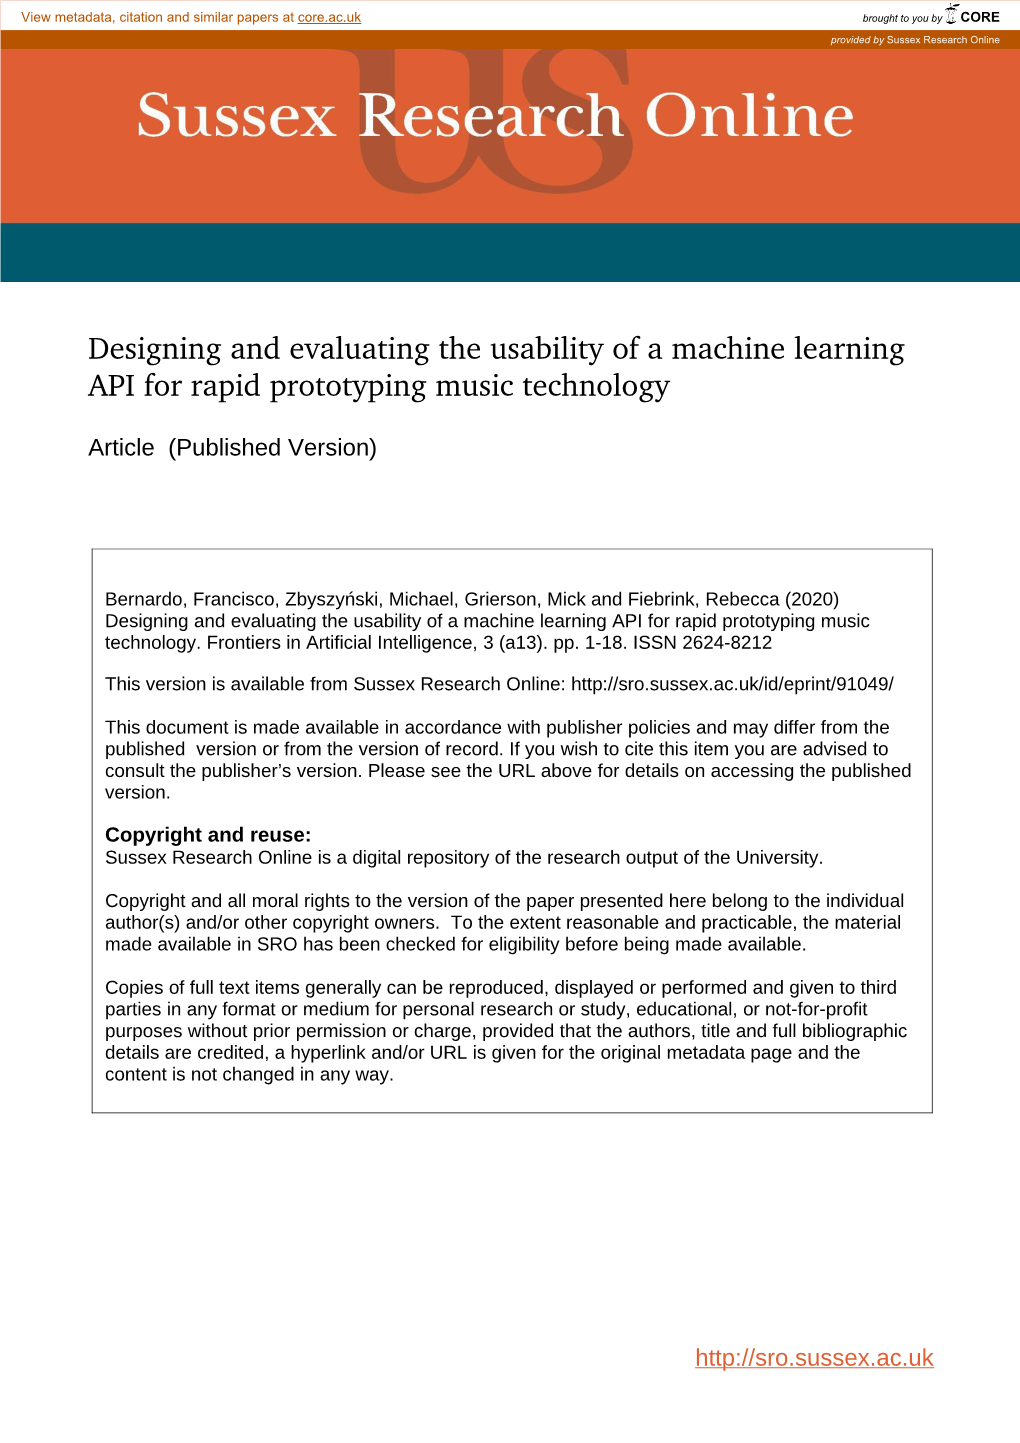 Designing and Evaluating the Usability of a Machine Learning API for Rapid Prototyping Music Technology